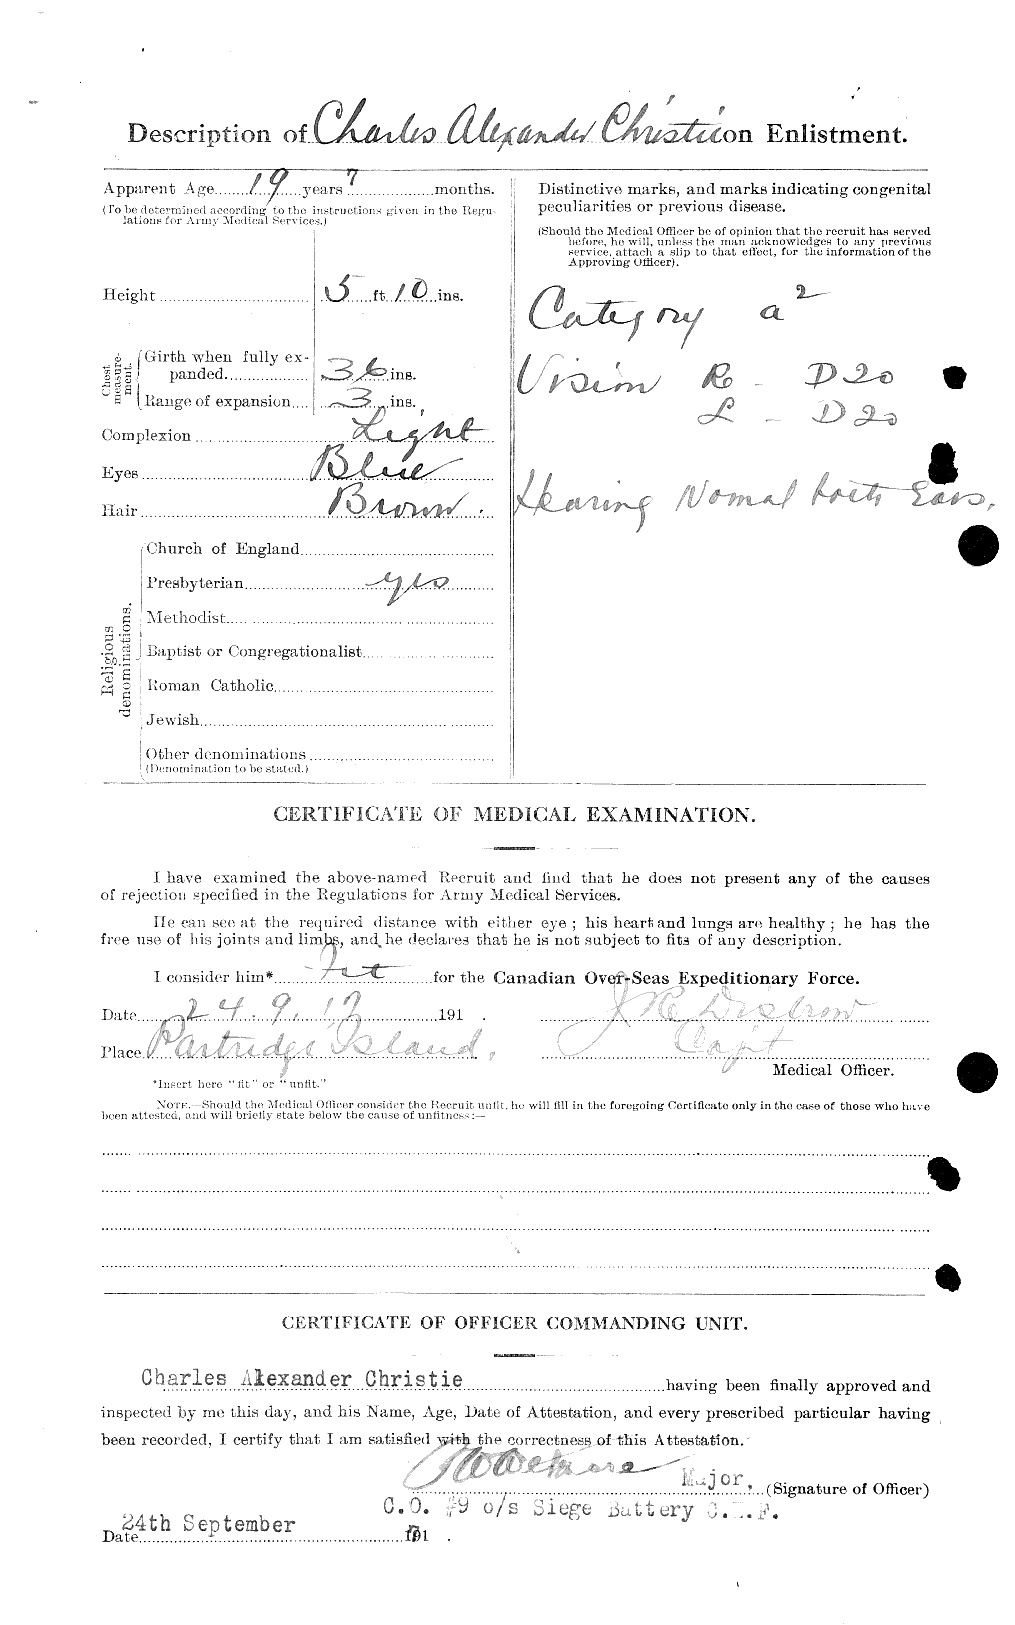 Personnel Records of the First World War - CEF 021891b